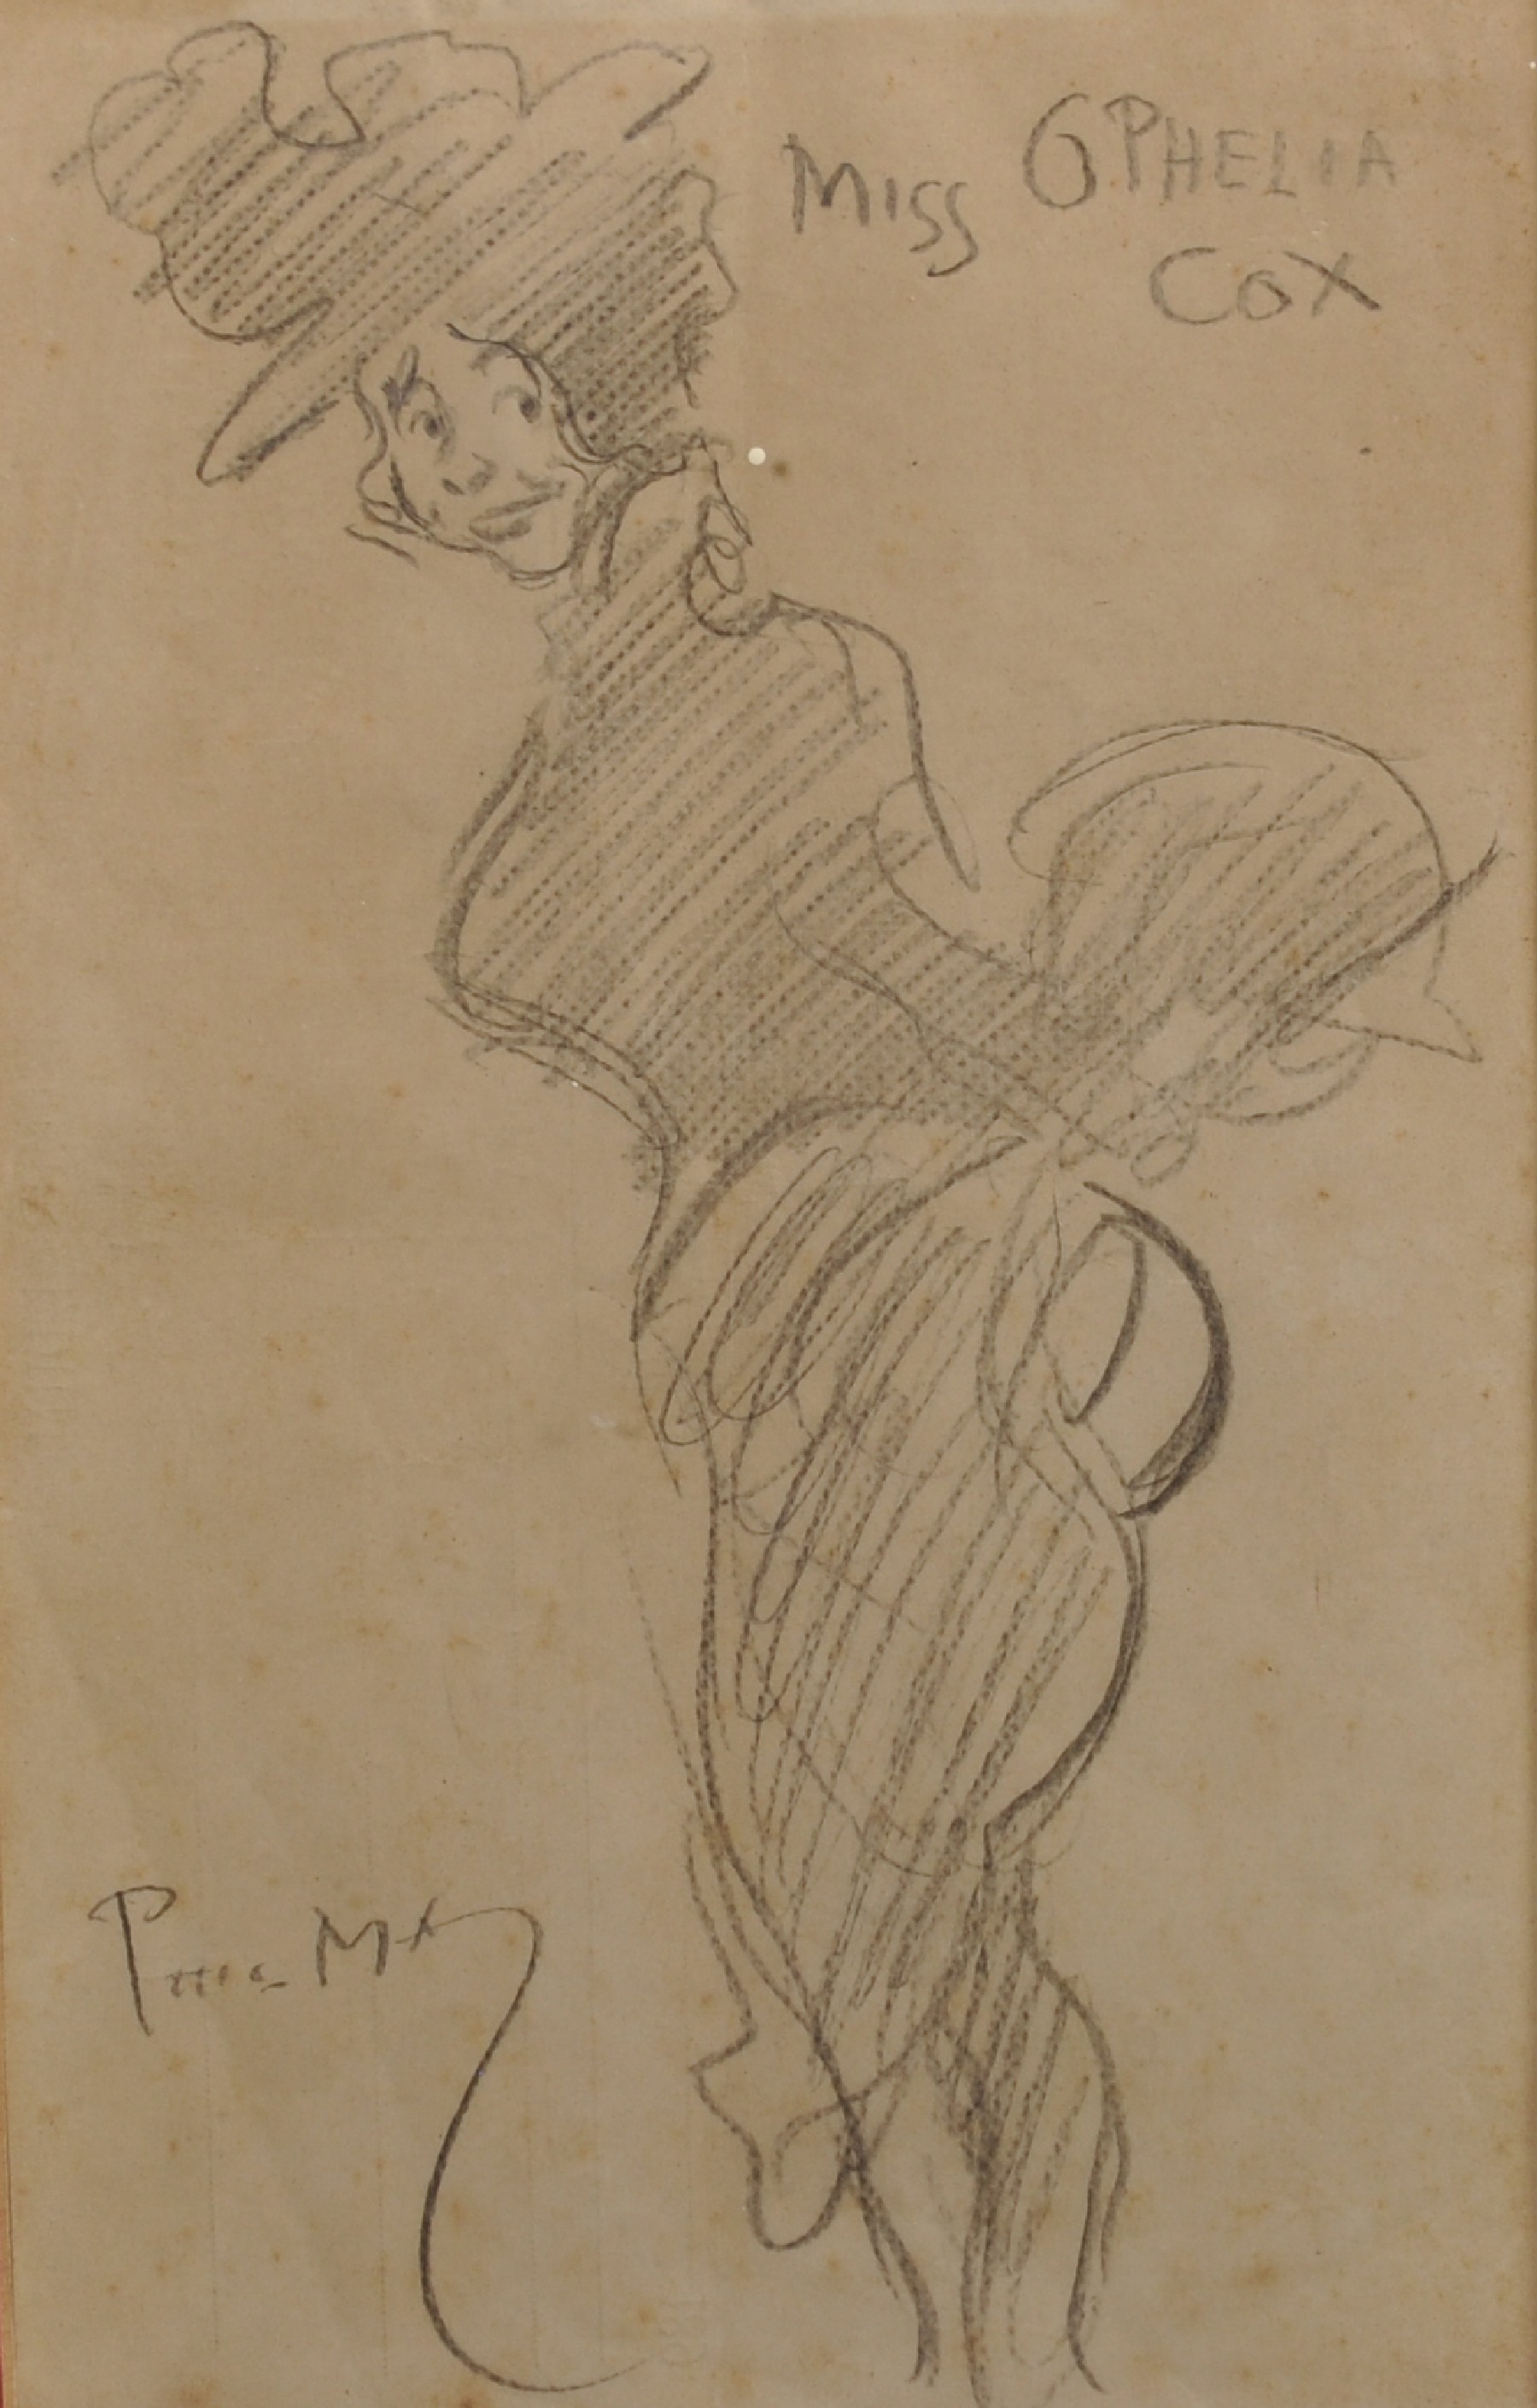 Phil May (1864-1903) British. "Miss Ophelia Cox", wearing a Bustle and Hat, Pencil, Signed and